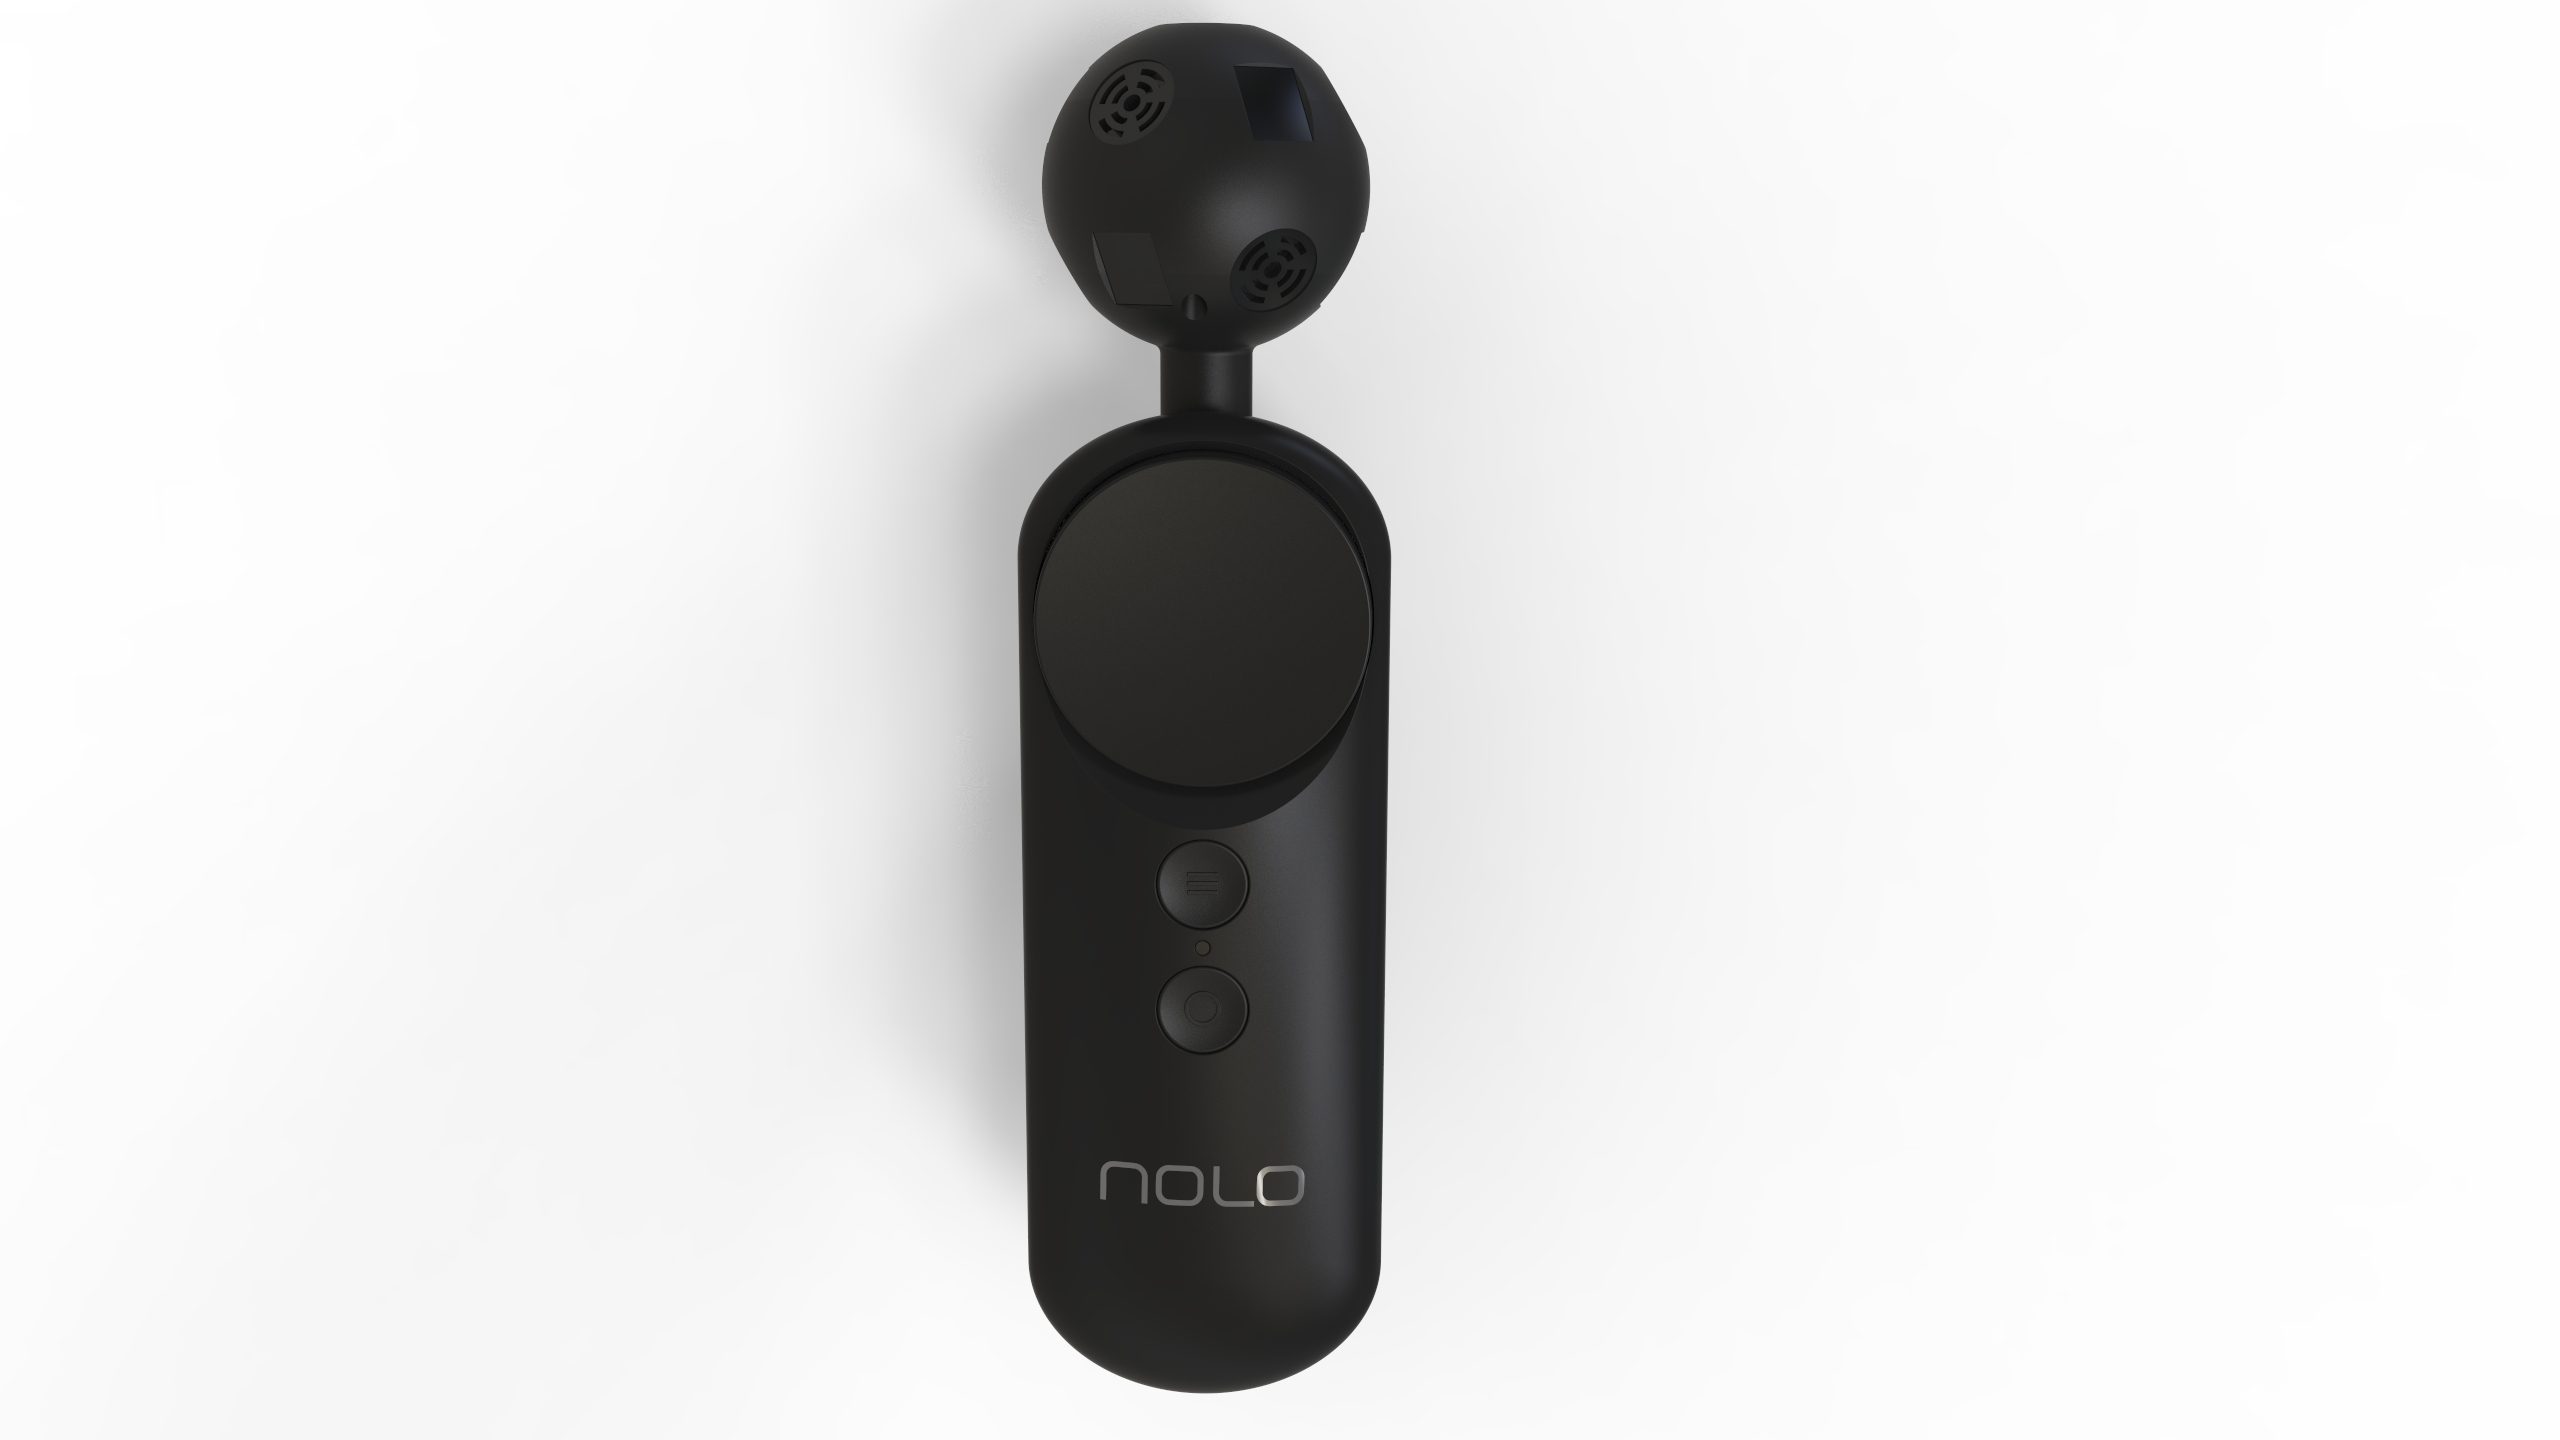 NOLO VR Promises $99 Positional Tracking and SteamVR Gaming on Any